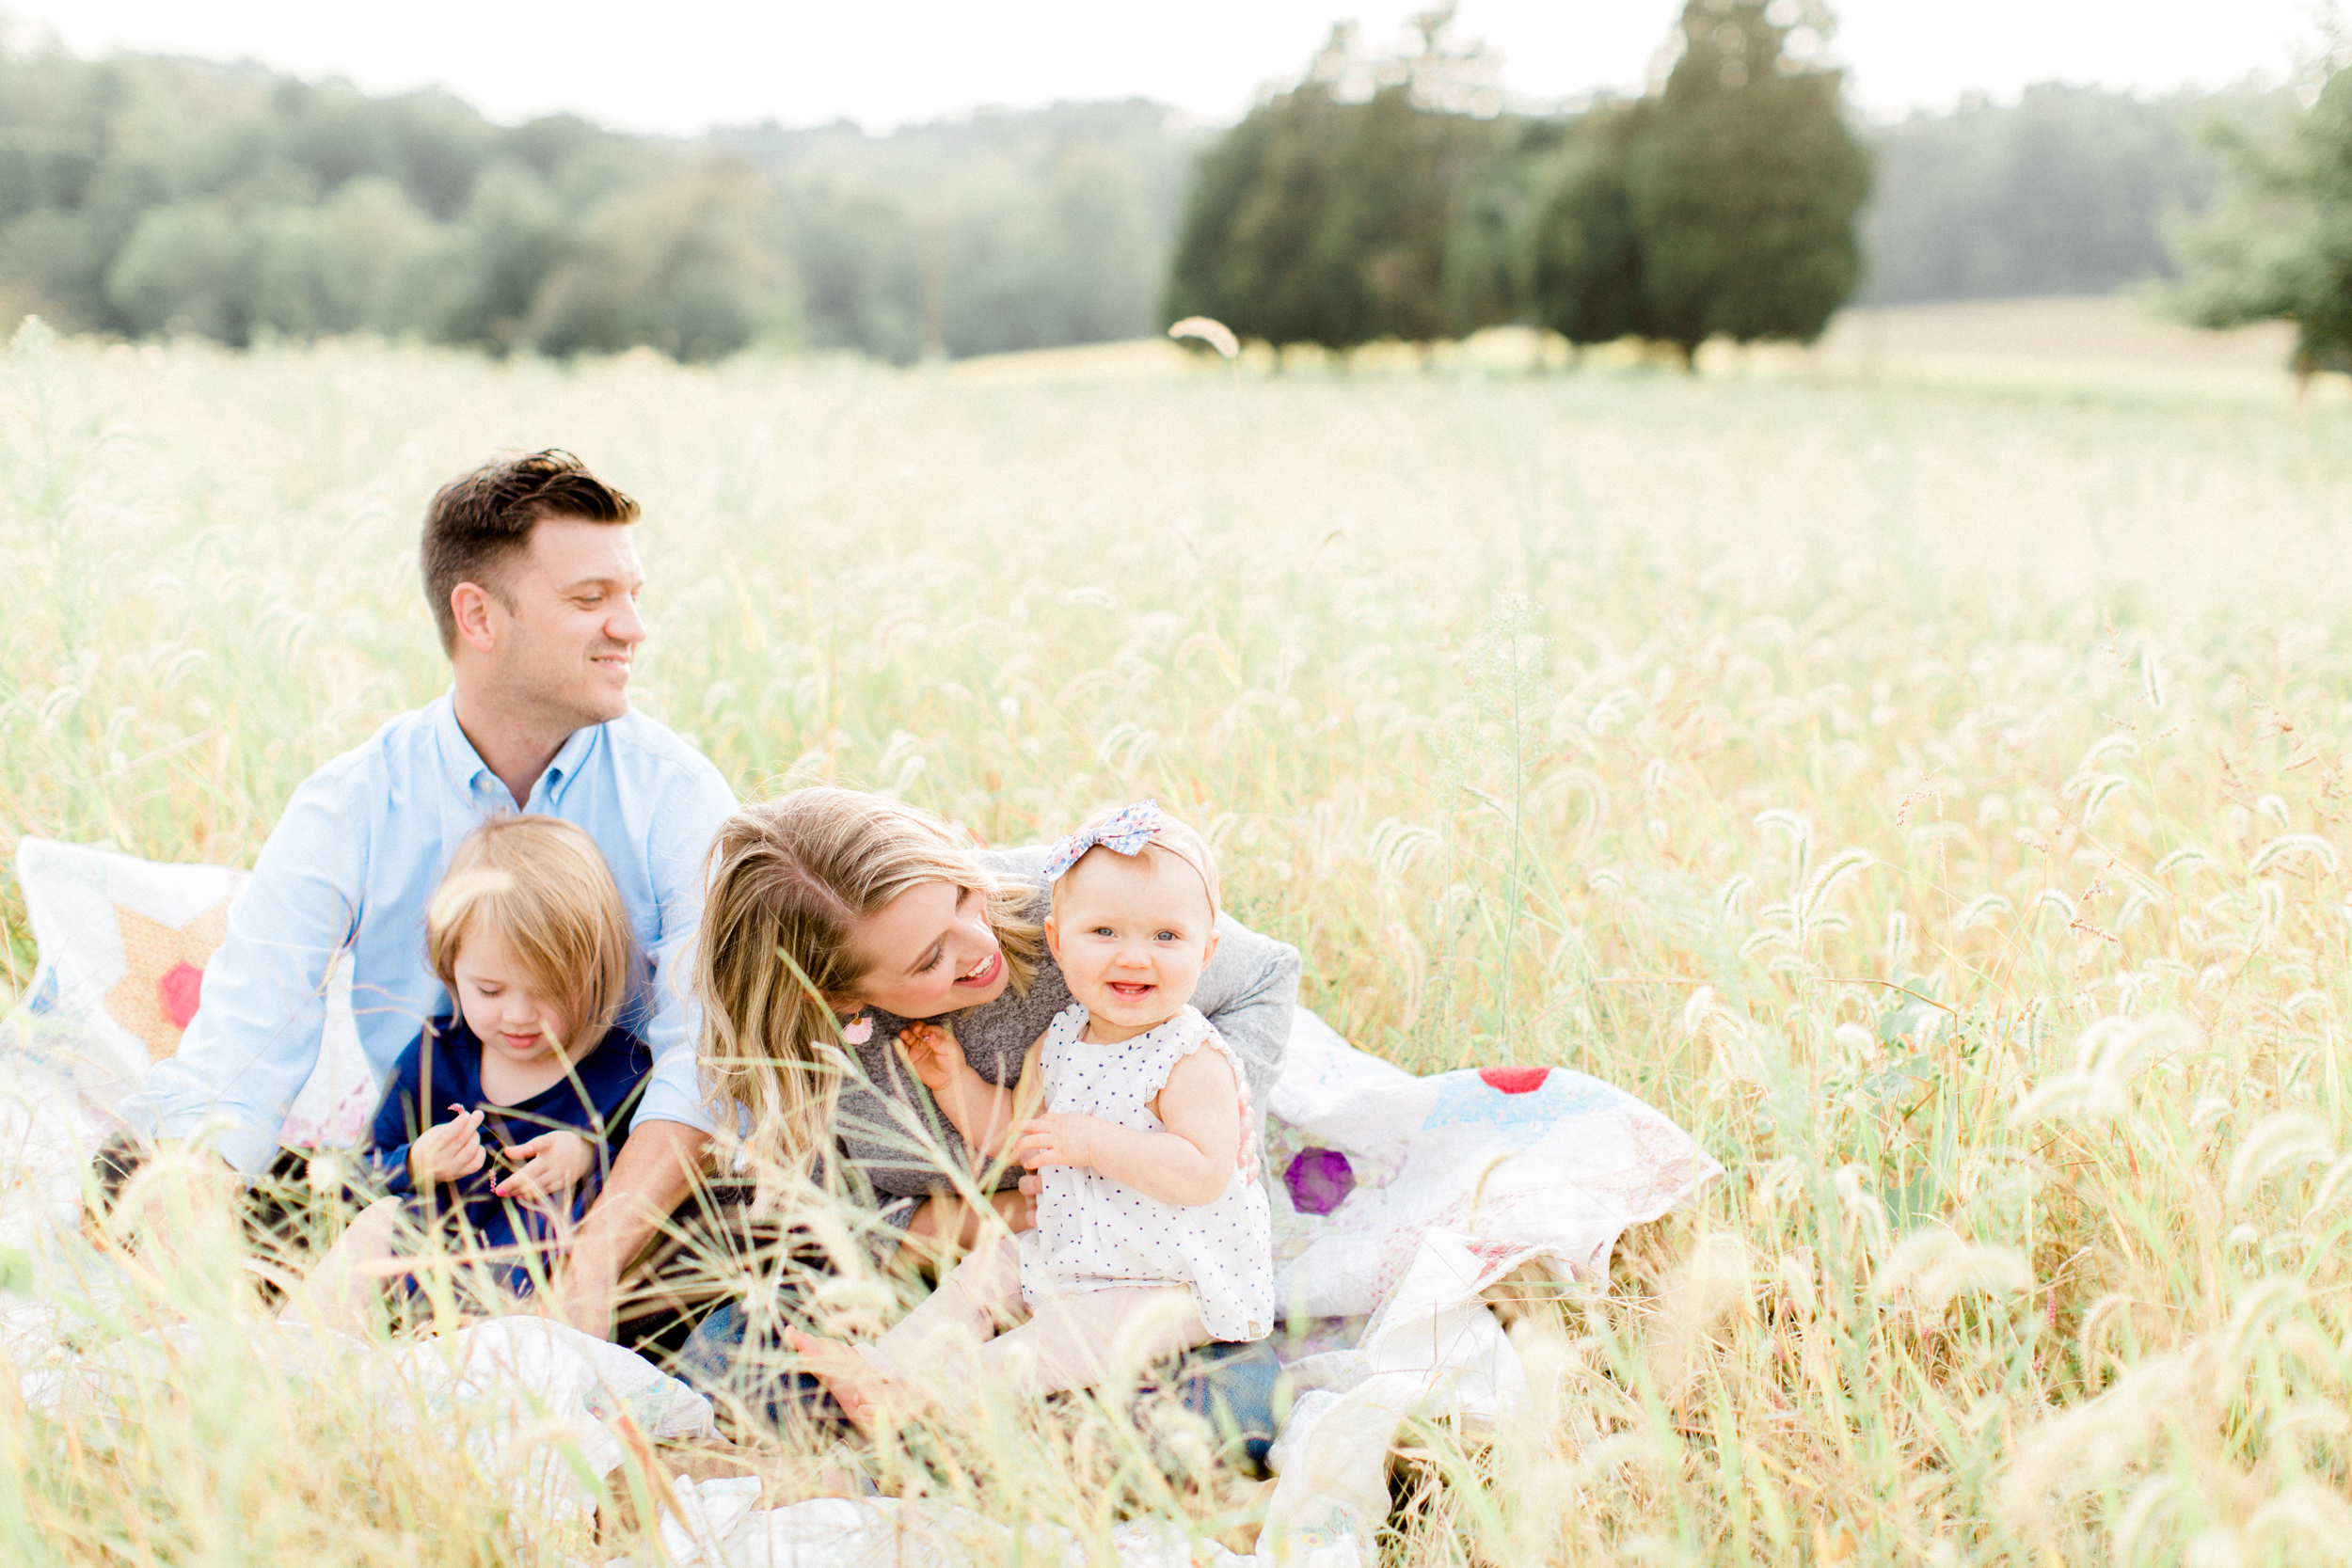 Fall family photo in a field. Photographed by morgan williams photography.